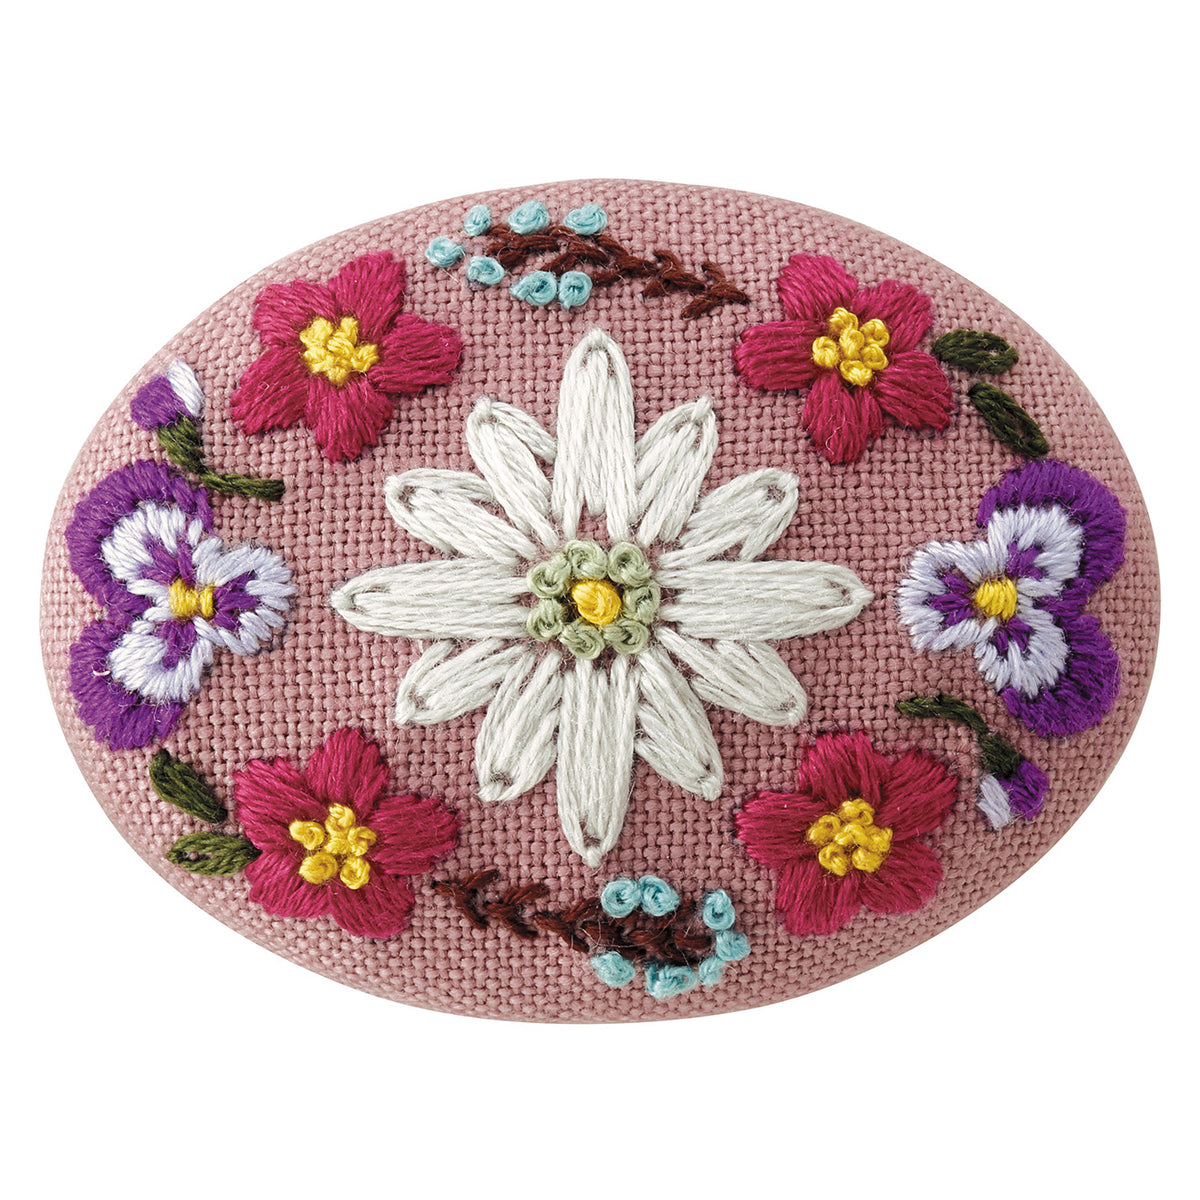 Hand Embroidery Brooch Kit - Edelweiss